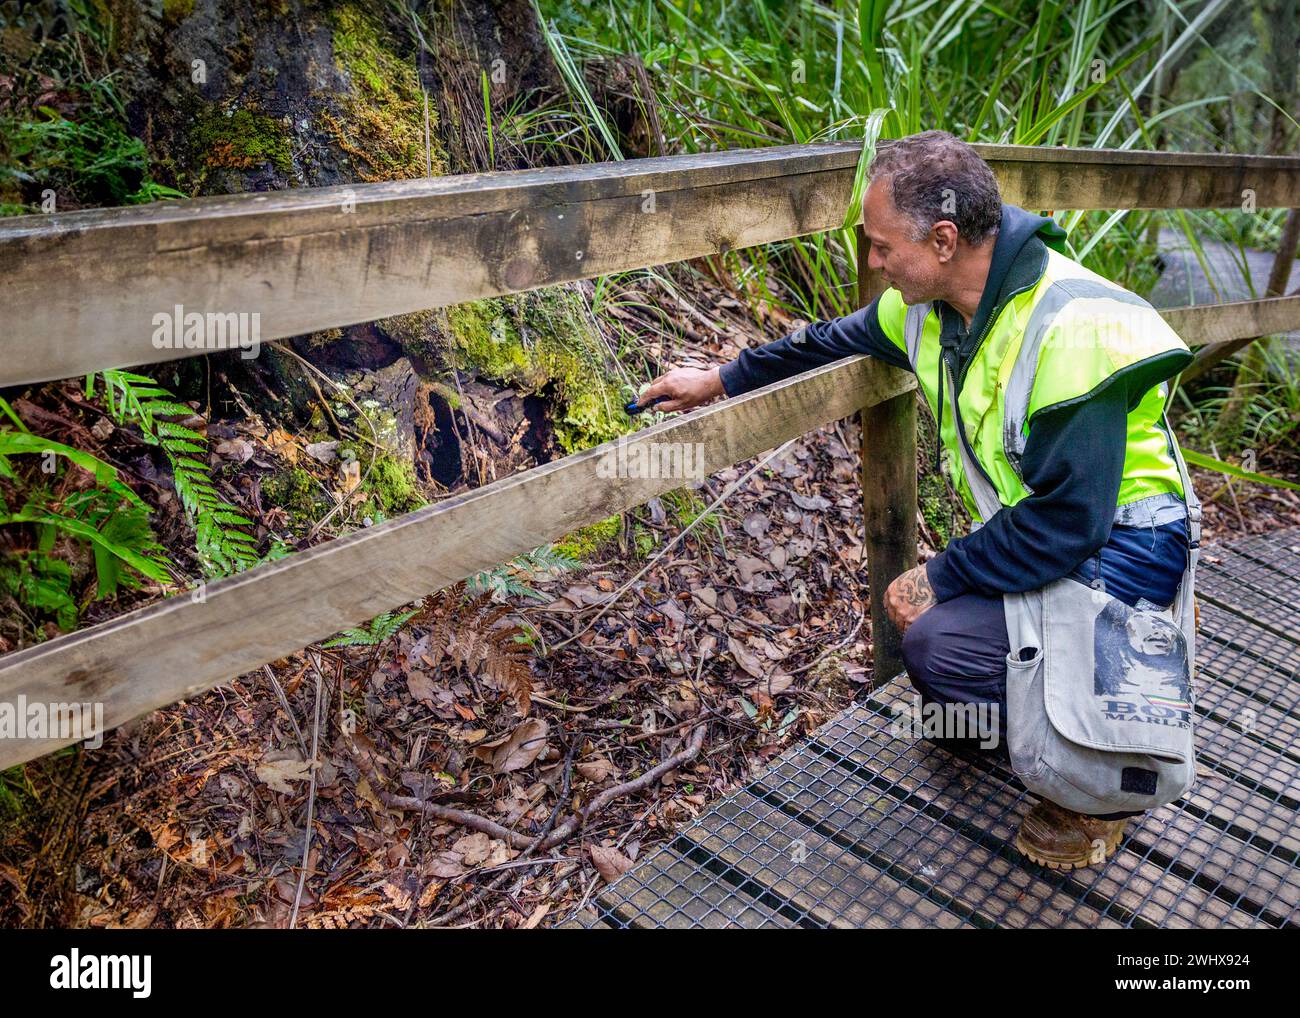 Māori guide pointing to a brown kiwi bird habitat at the base of a tree in the ancient Waipoua Kauri Forest in Aotearoa / New Zealand, Te Ika-a-Maui / Stock Photo